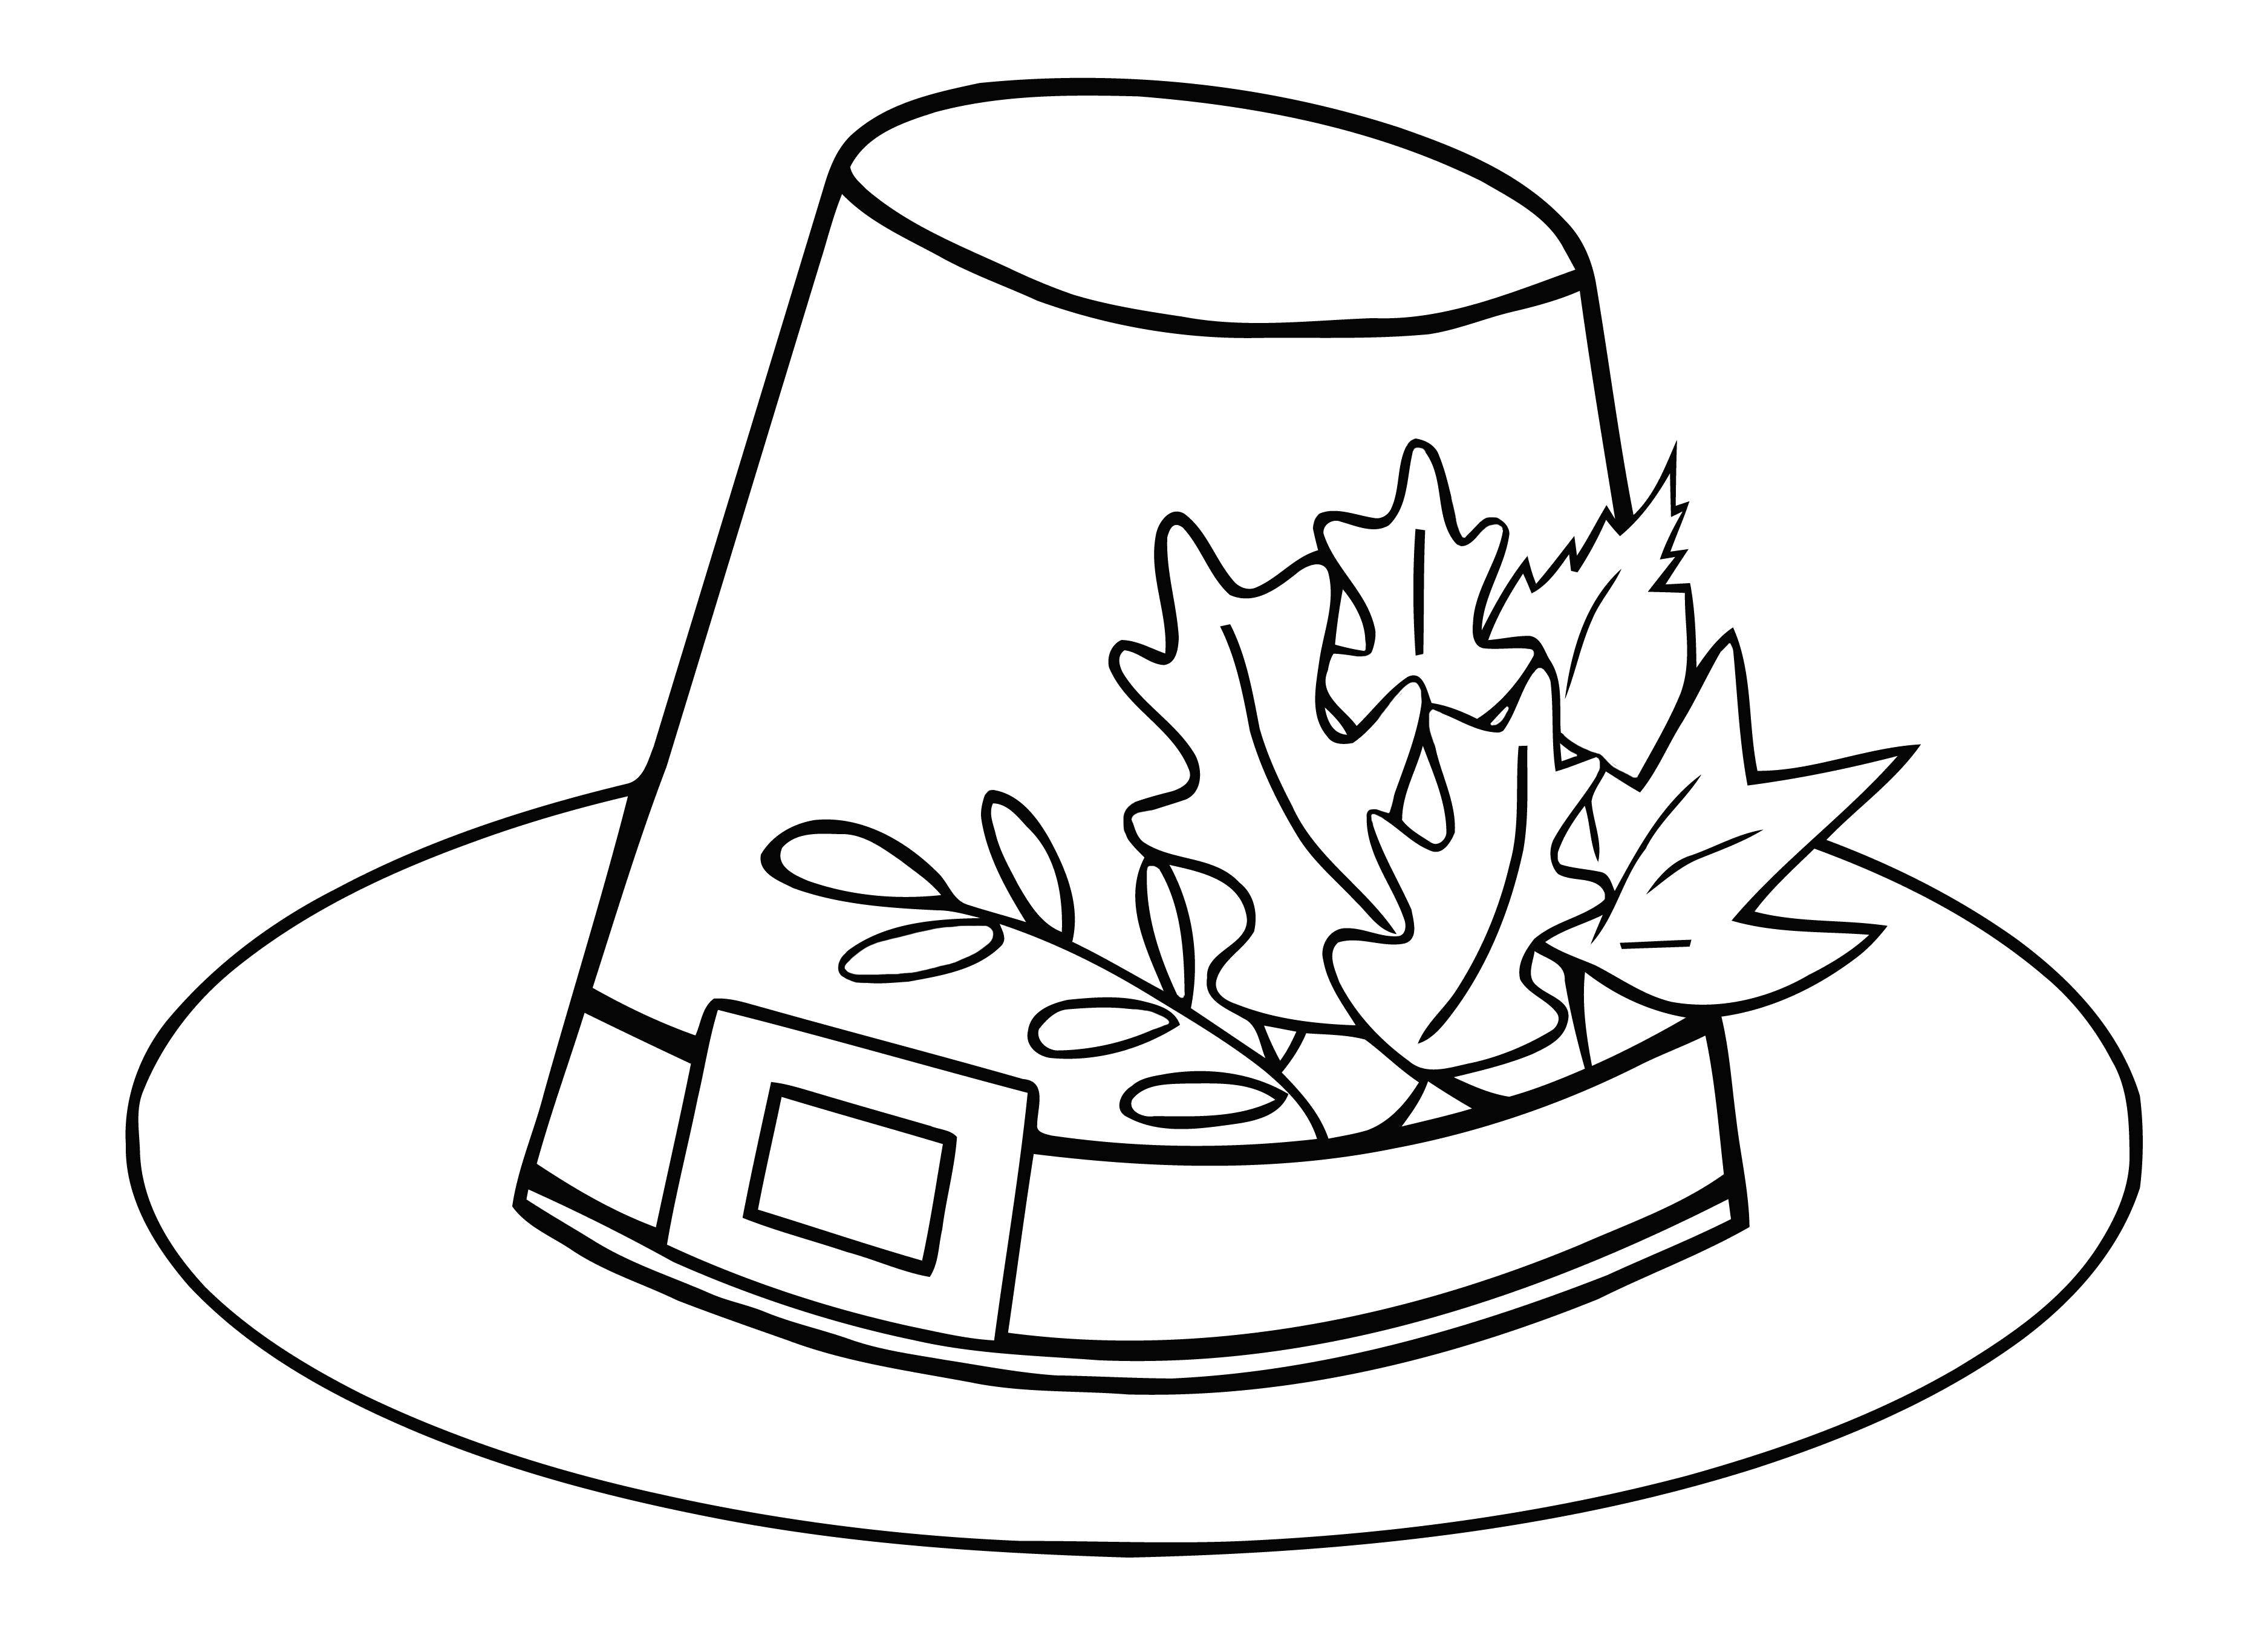 Coloring Hat of the leprechaun. Category Clothing. Tags:  The clothes, hat.